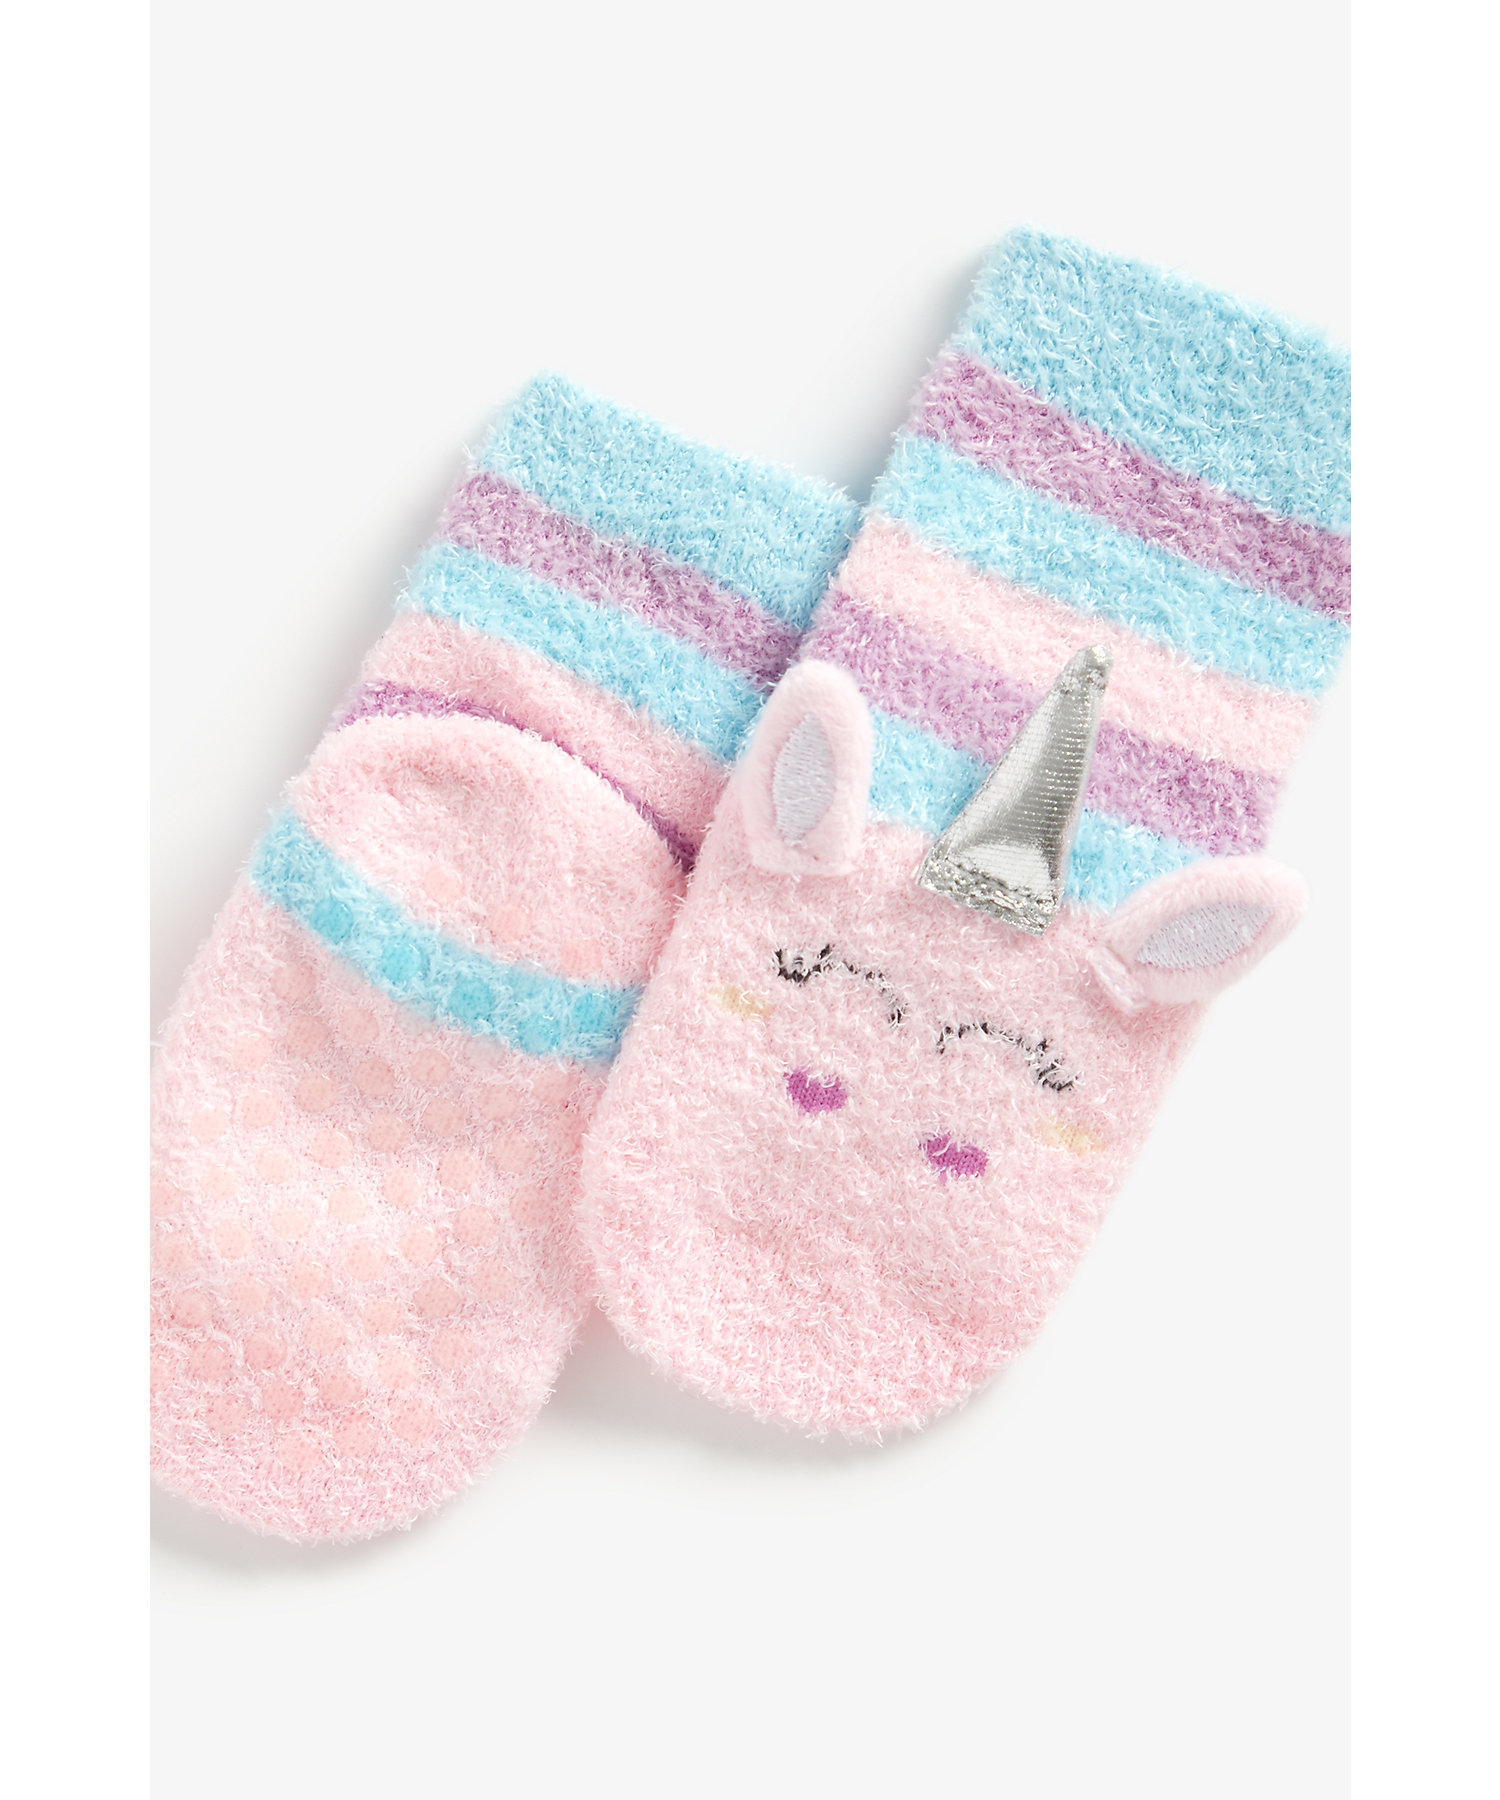 Mothercare | Boys Socks - Pack of 5 - Multicolor 1